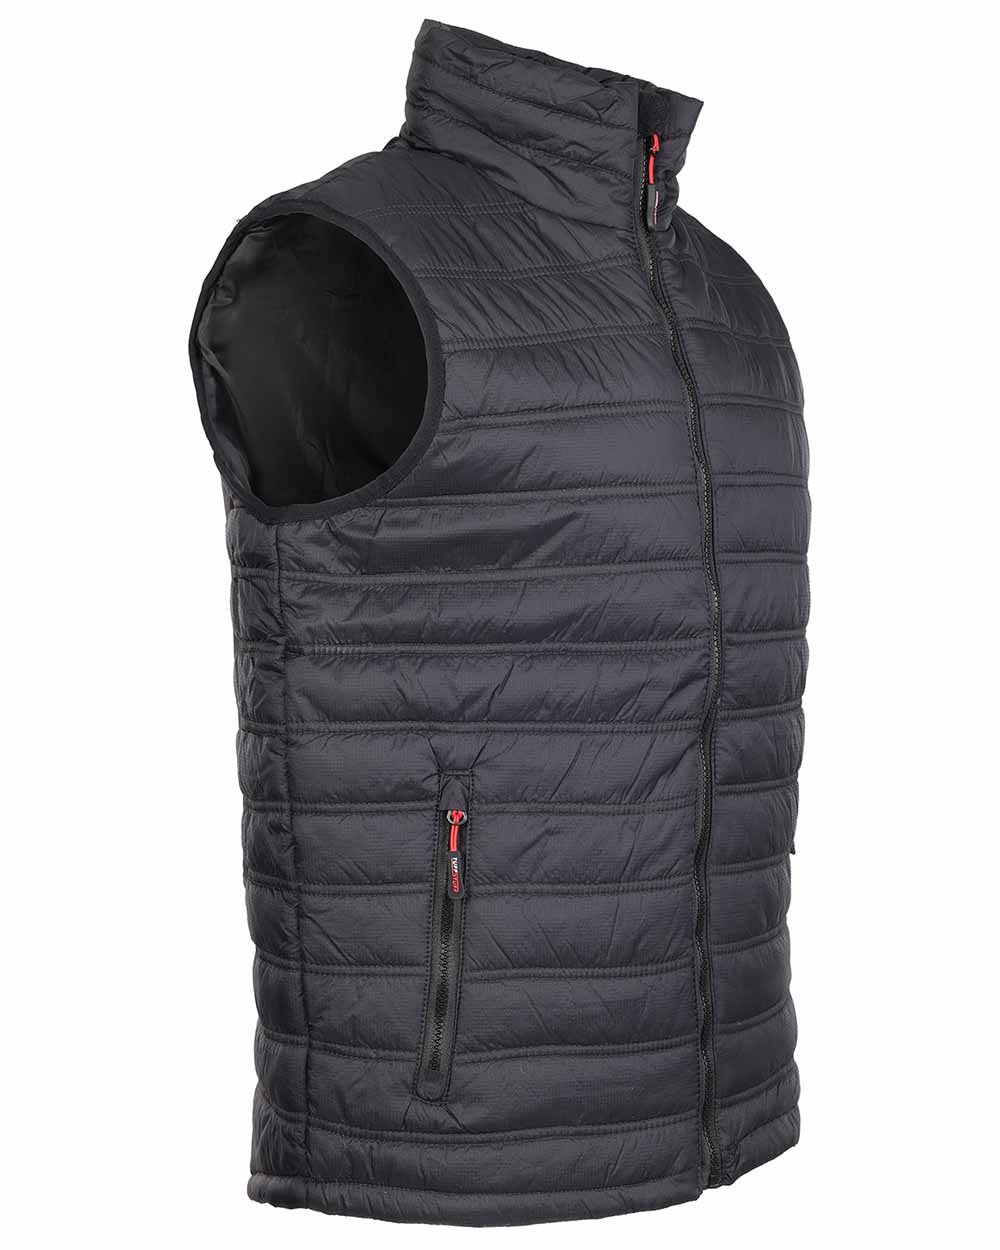 Side view showing arm holes TuffStuff Elite Quilted Bodywarmer in black